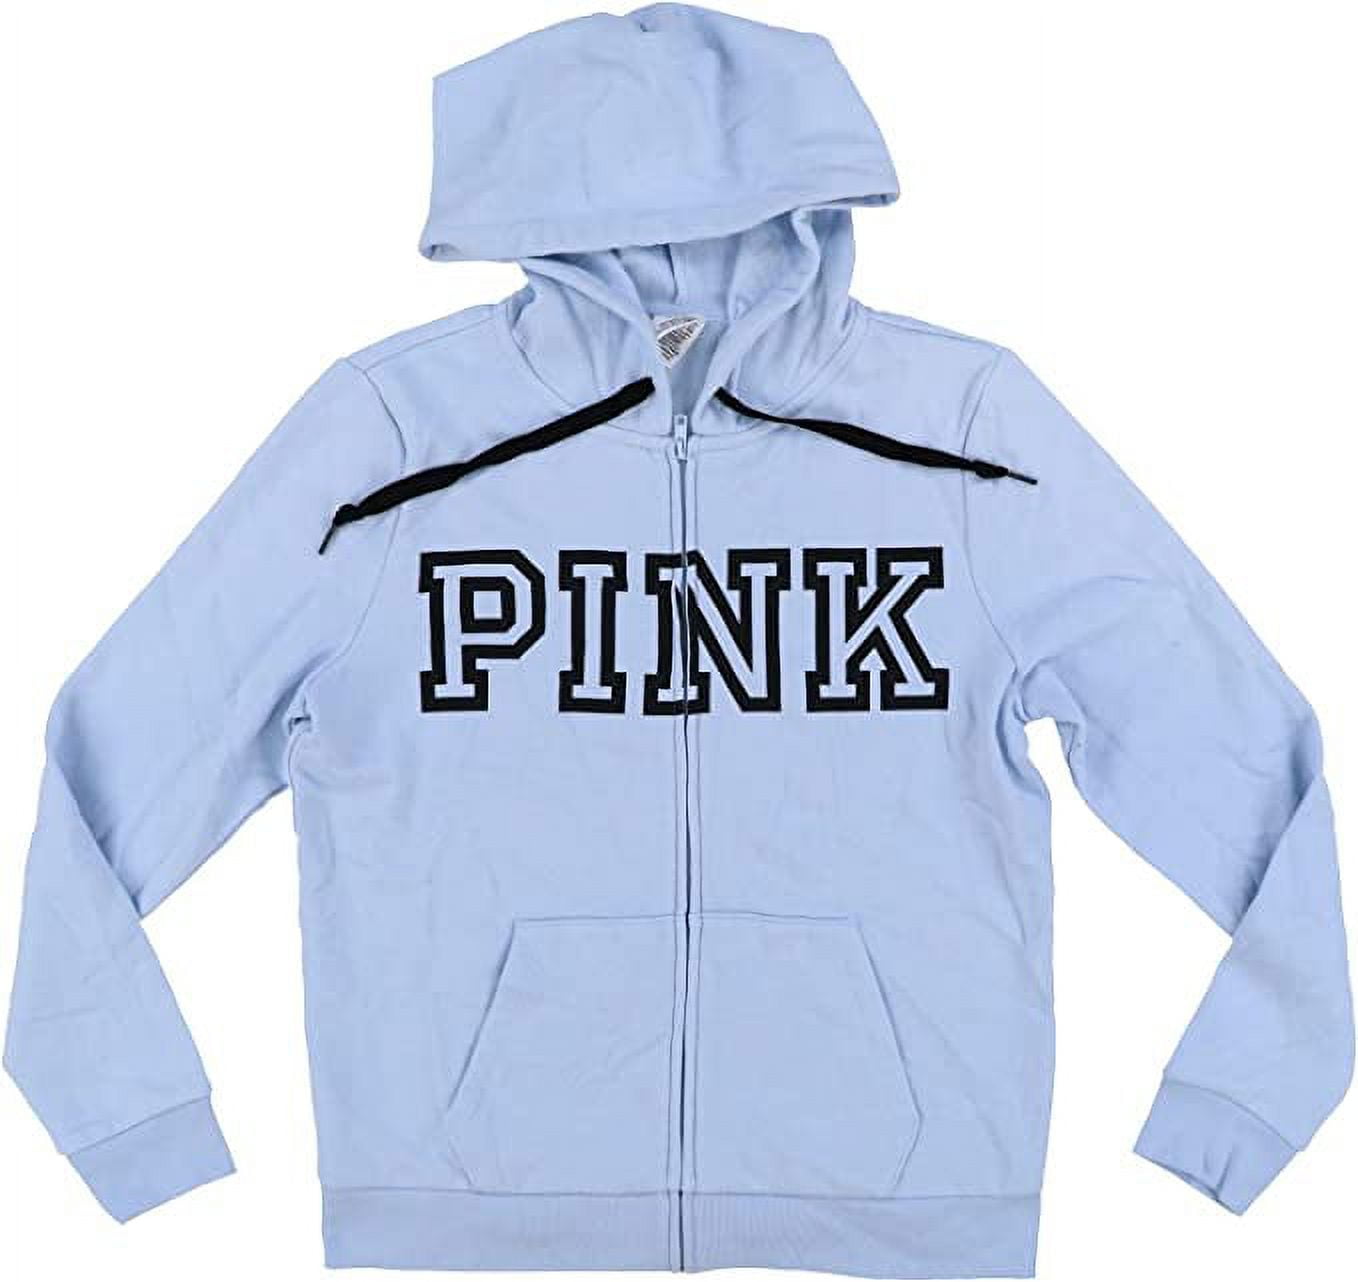 Victoria's Secret Pink Perfect Full Zip Hoodie Sky Blue Size X-Small NWT